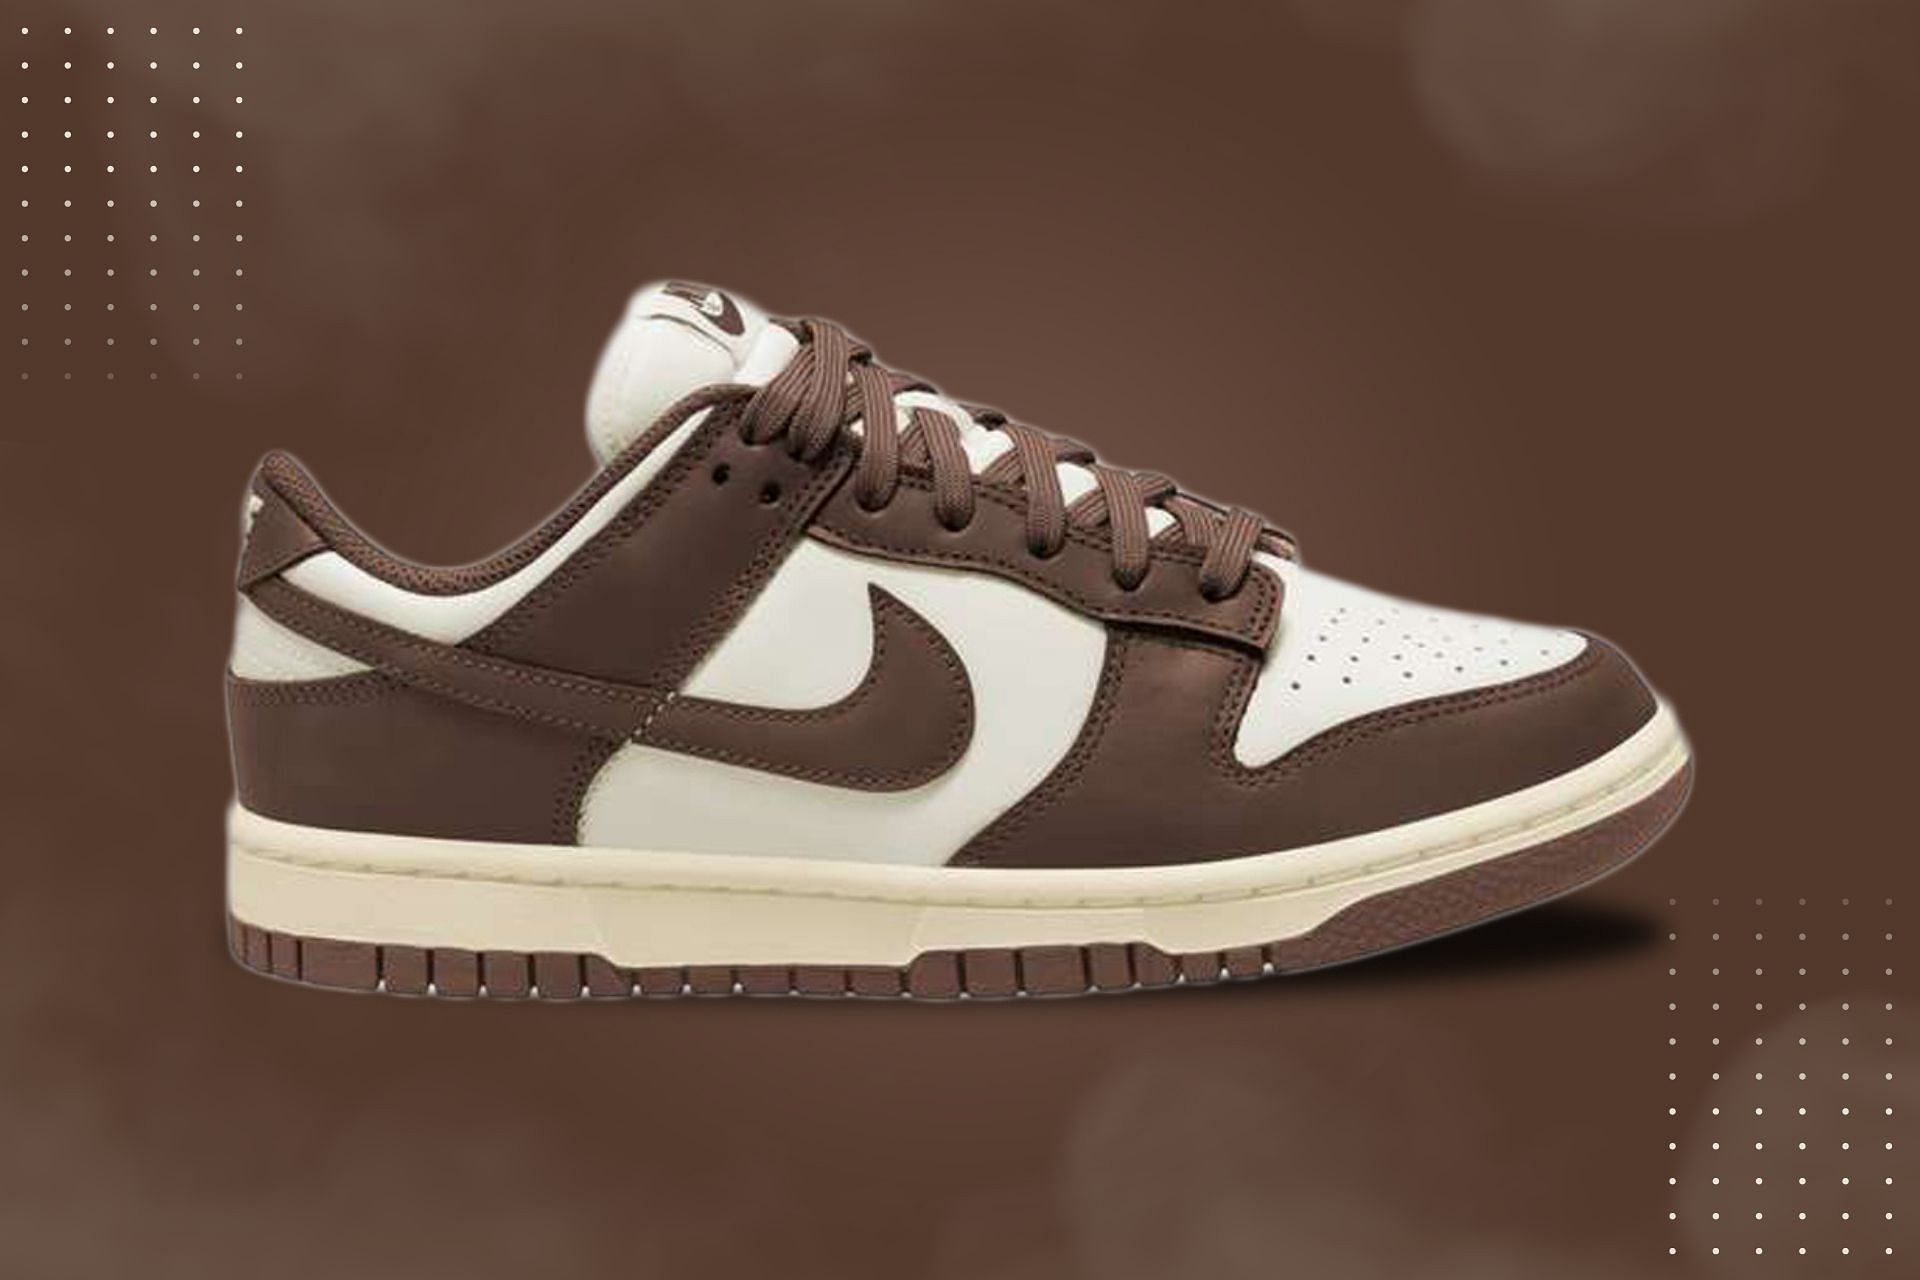 Nike Dunk Low Sail Cacao Wow sneakers: Where to buy, price, and